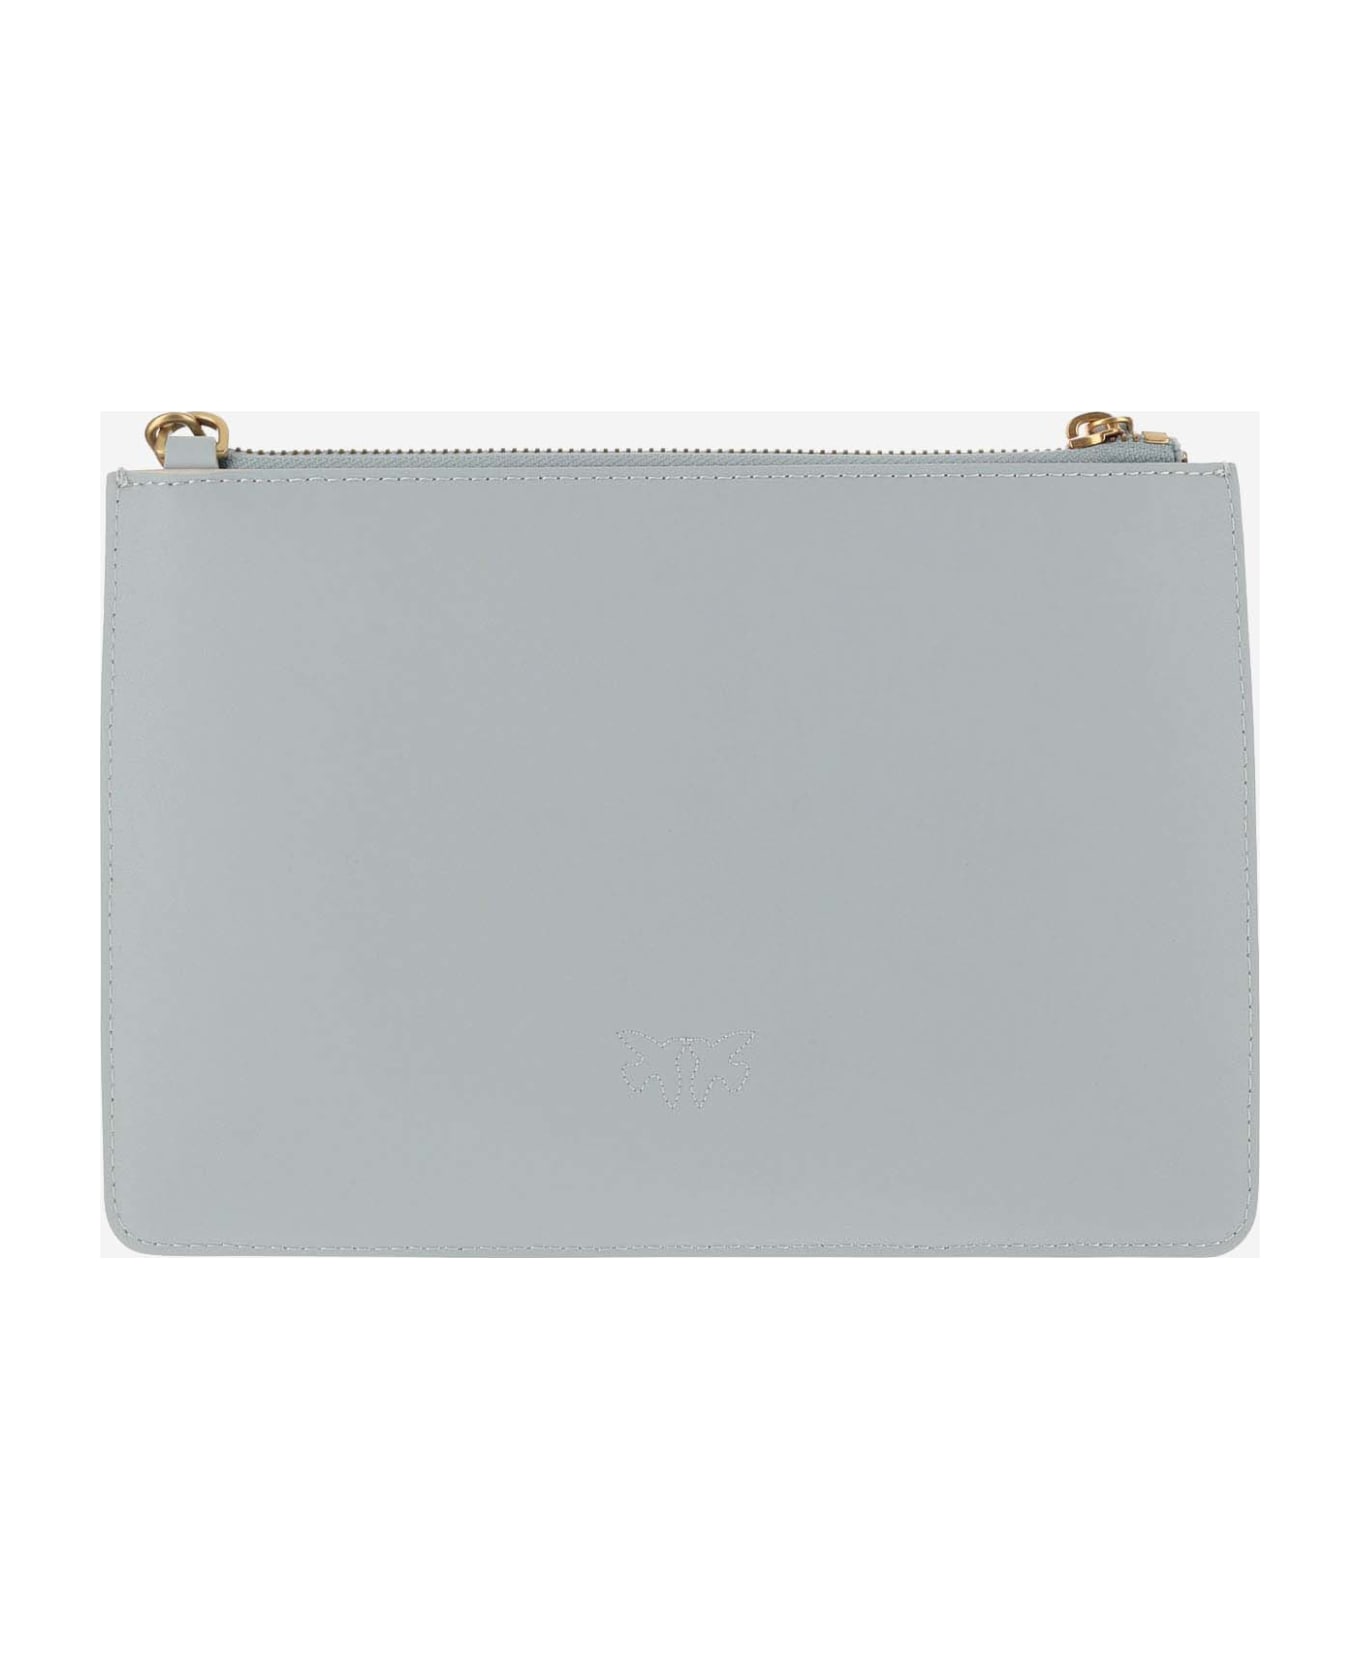 Pinko Classic Flat Love Bag Simply Clutch - Blue クラッチバッグ